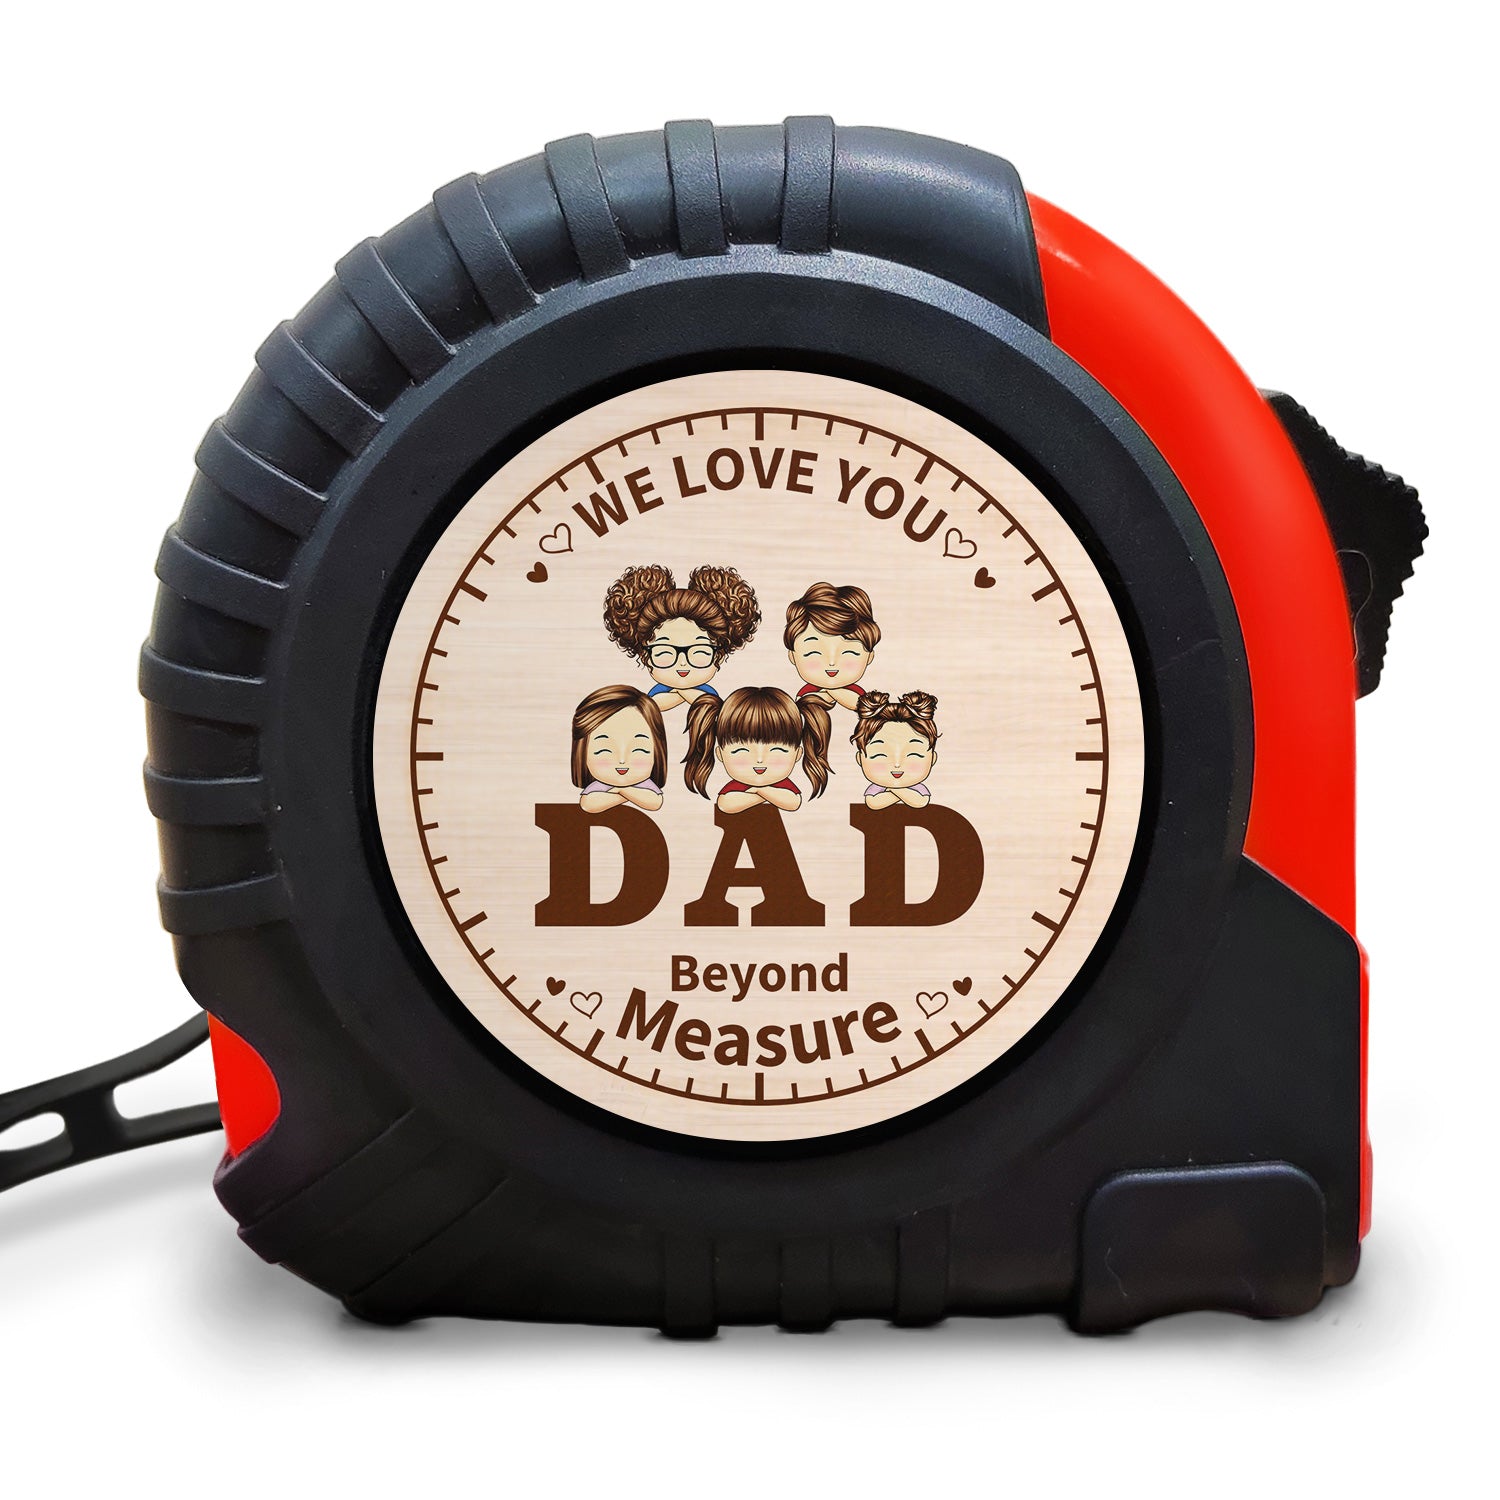 Dad Grandpa We Love You Beyond Measure - Gift For Father, Grandfather - Personalized Tape Measure